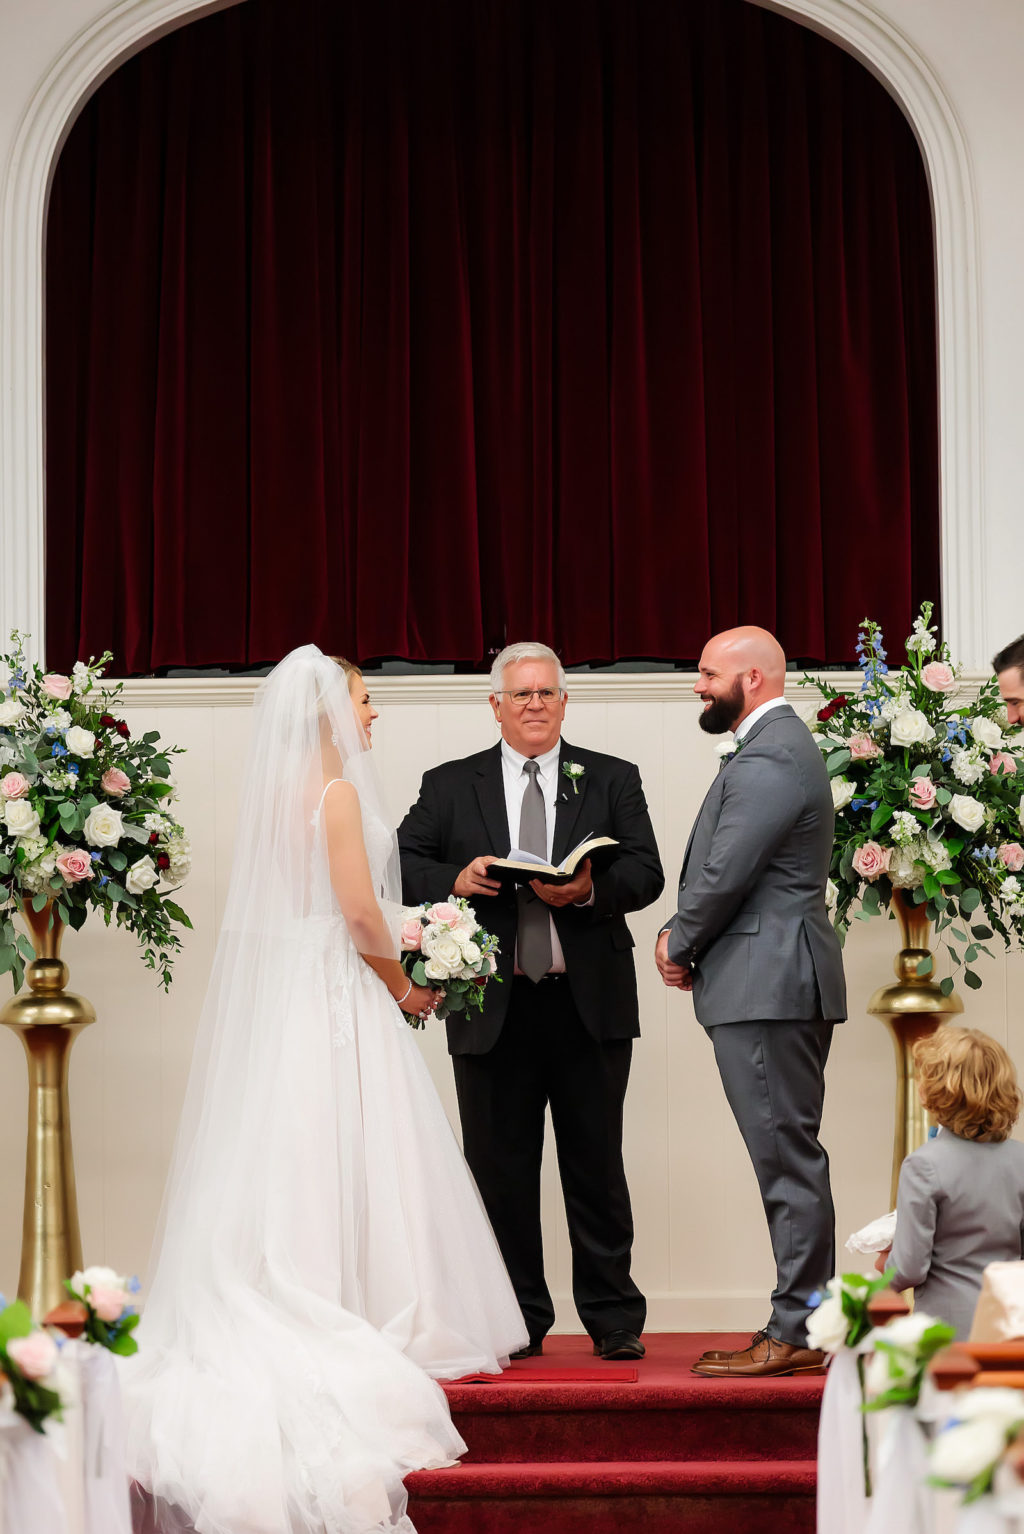 Bride and Groom Exchanging Vows during Traditional Tampa Church Wedding Ceremony | Groom Wearing Charcoal Grey Suit | Alter Floral Arrangements with Blush Pink and White Roses and Hydrangea with Eucalyptus Greenery on Gold Stands by Tampa Wedding Florist Monarch Events and Design